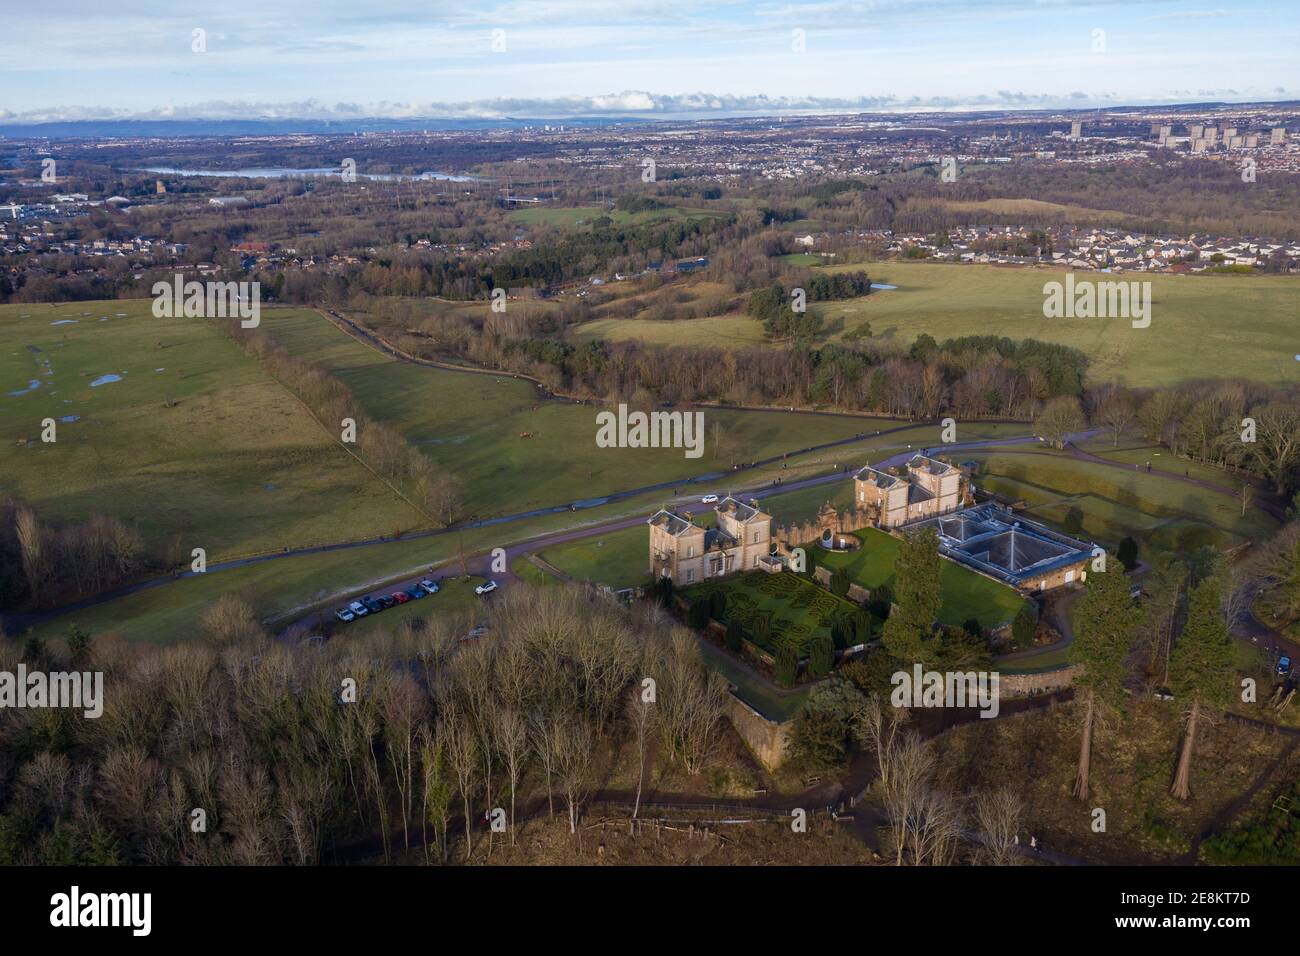 Hamilton, Scotland, UK. 31st Jan, 2021. Pictured: Aerial drone photography showing Chatelherault Country Park and the backdrop of Hamilton and Glasgow. The sun is out and people are enjoying themselves during the coronavirus phase 4 lockdown. Temperatures are around 2 degrees with temperatures expected to fall overnight again with some freezing conditions. Calm and very sunny with blue skies. Credit: Colin Fisher/Alamy Live News Stock Photo